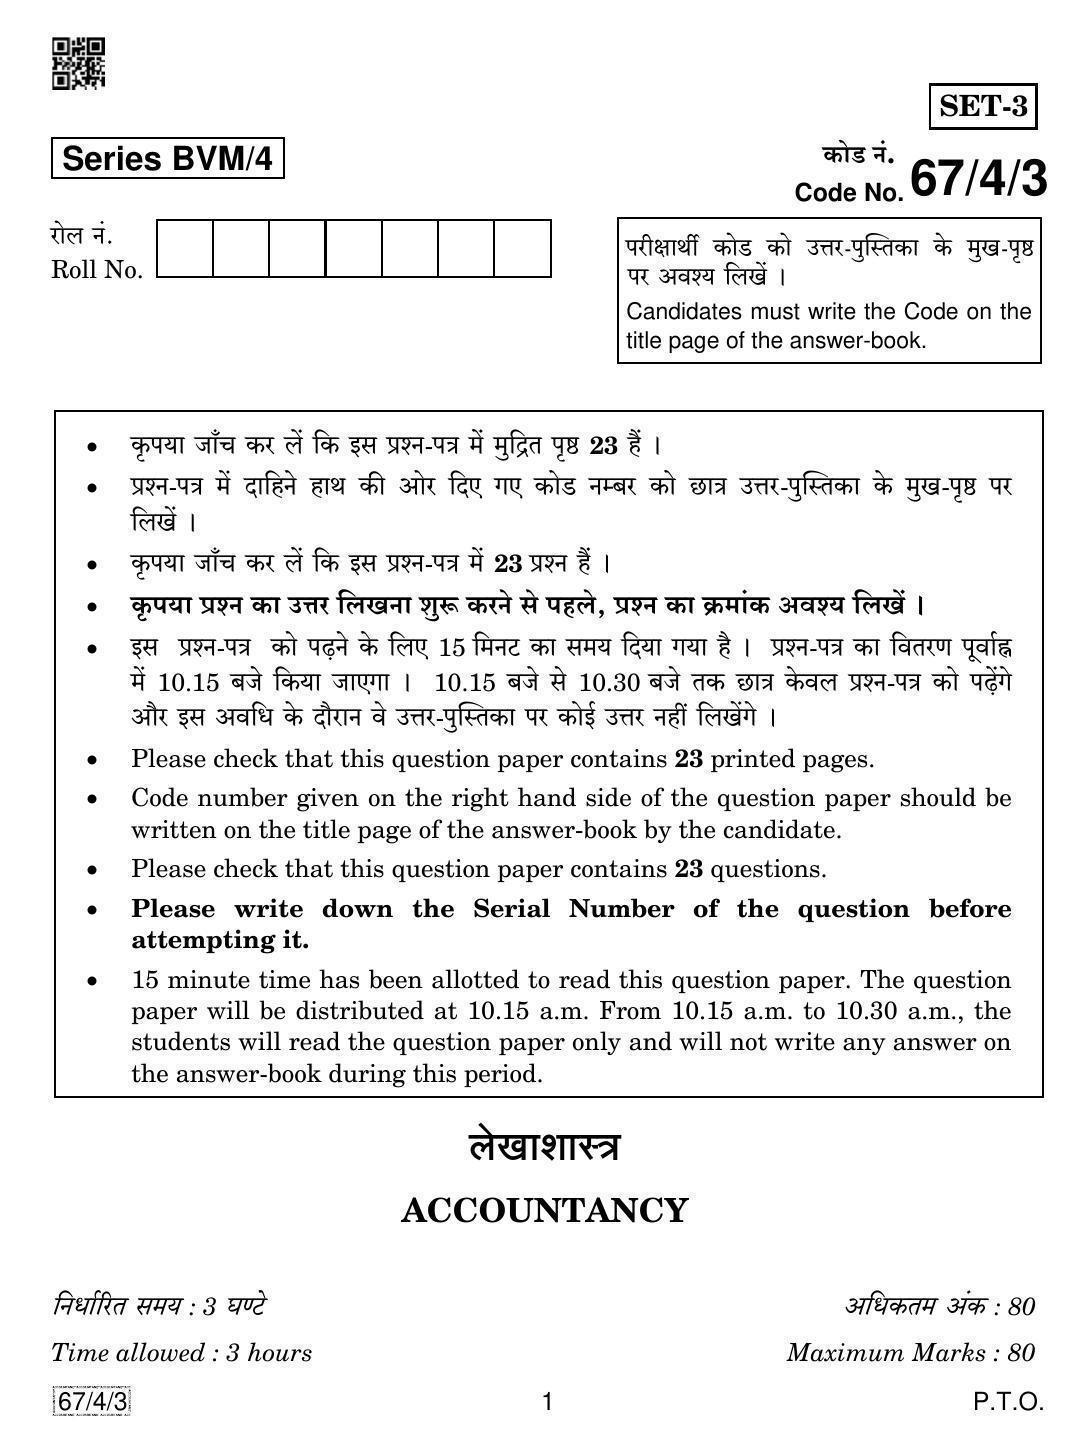 CBSE Class 12 67-4-3 Accountancy 2019 Question Paper - Page 1